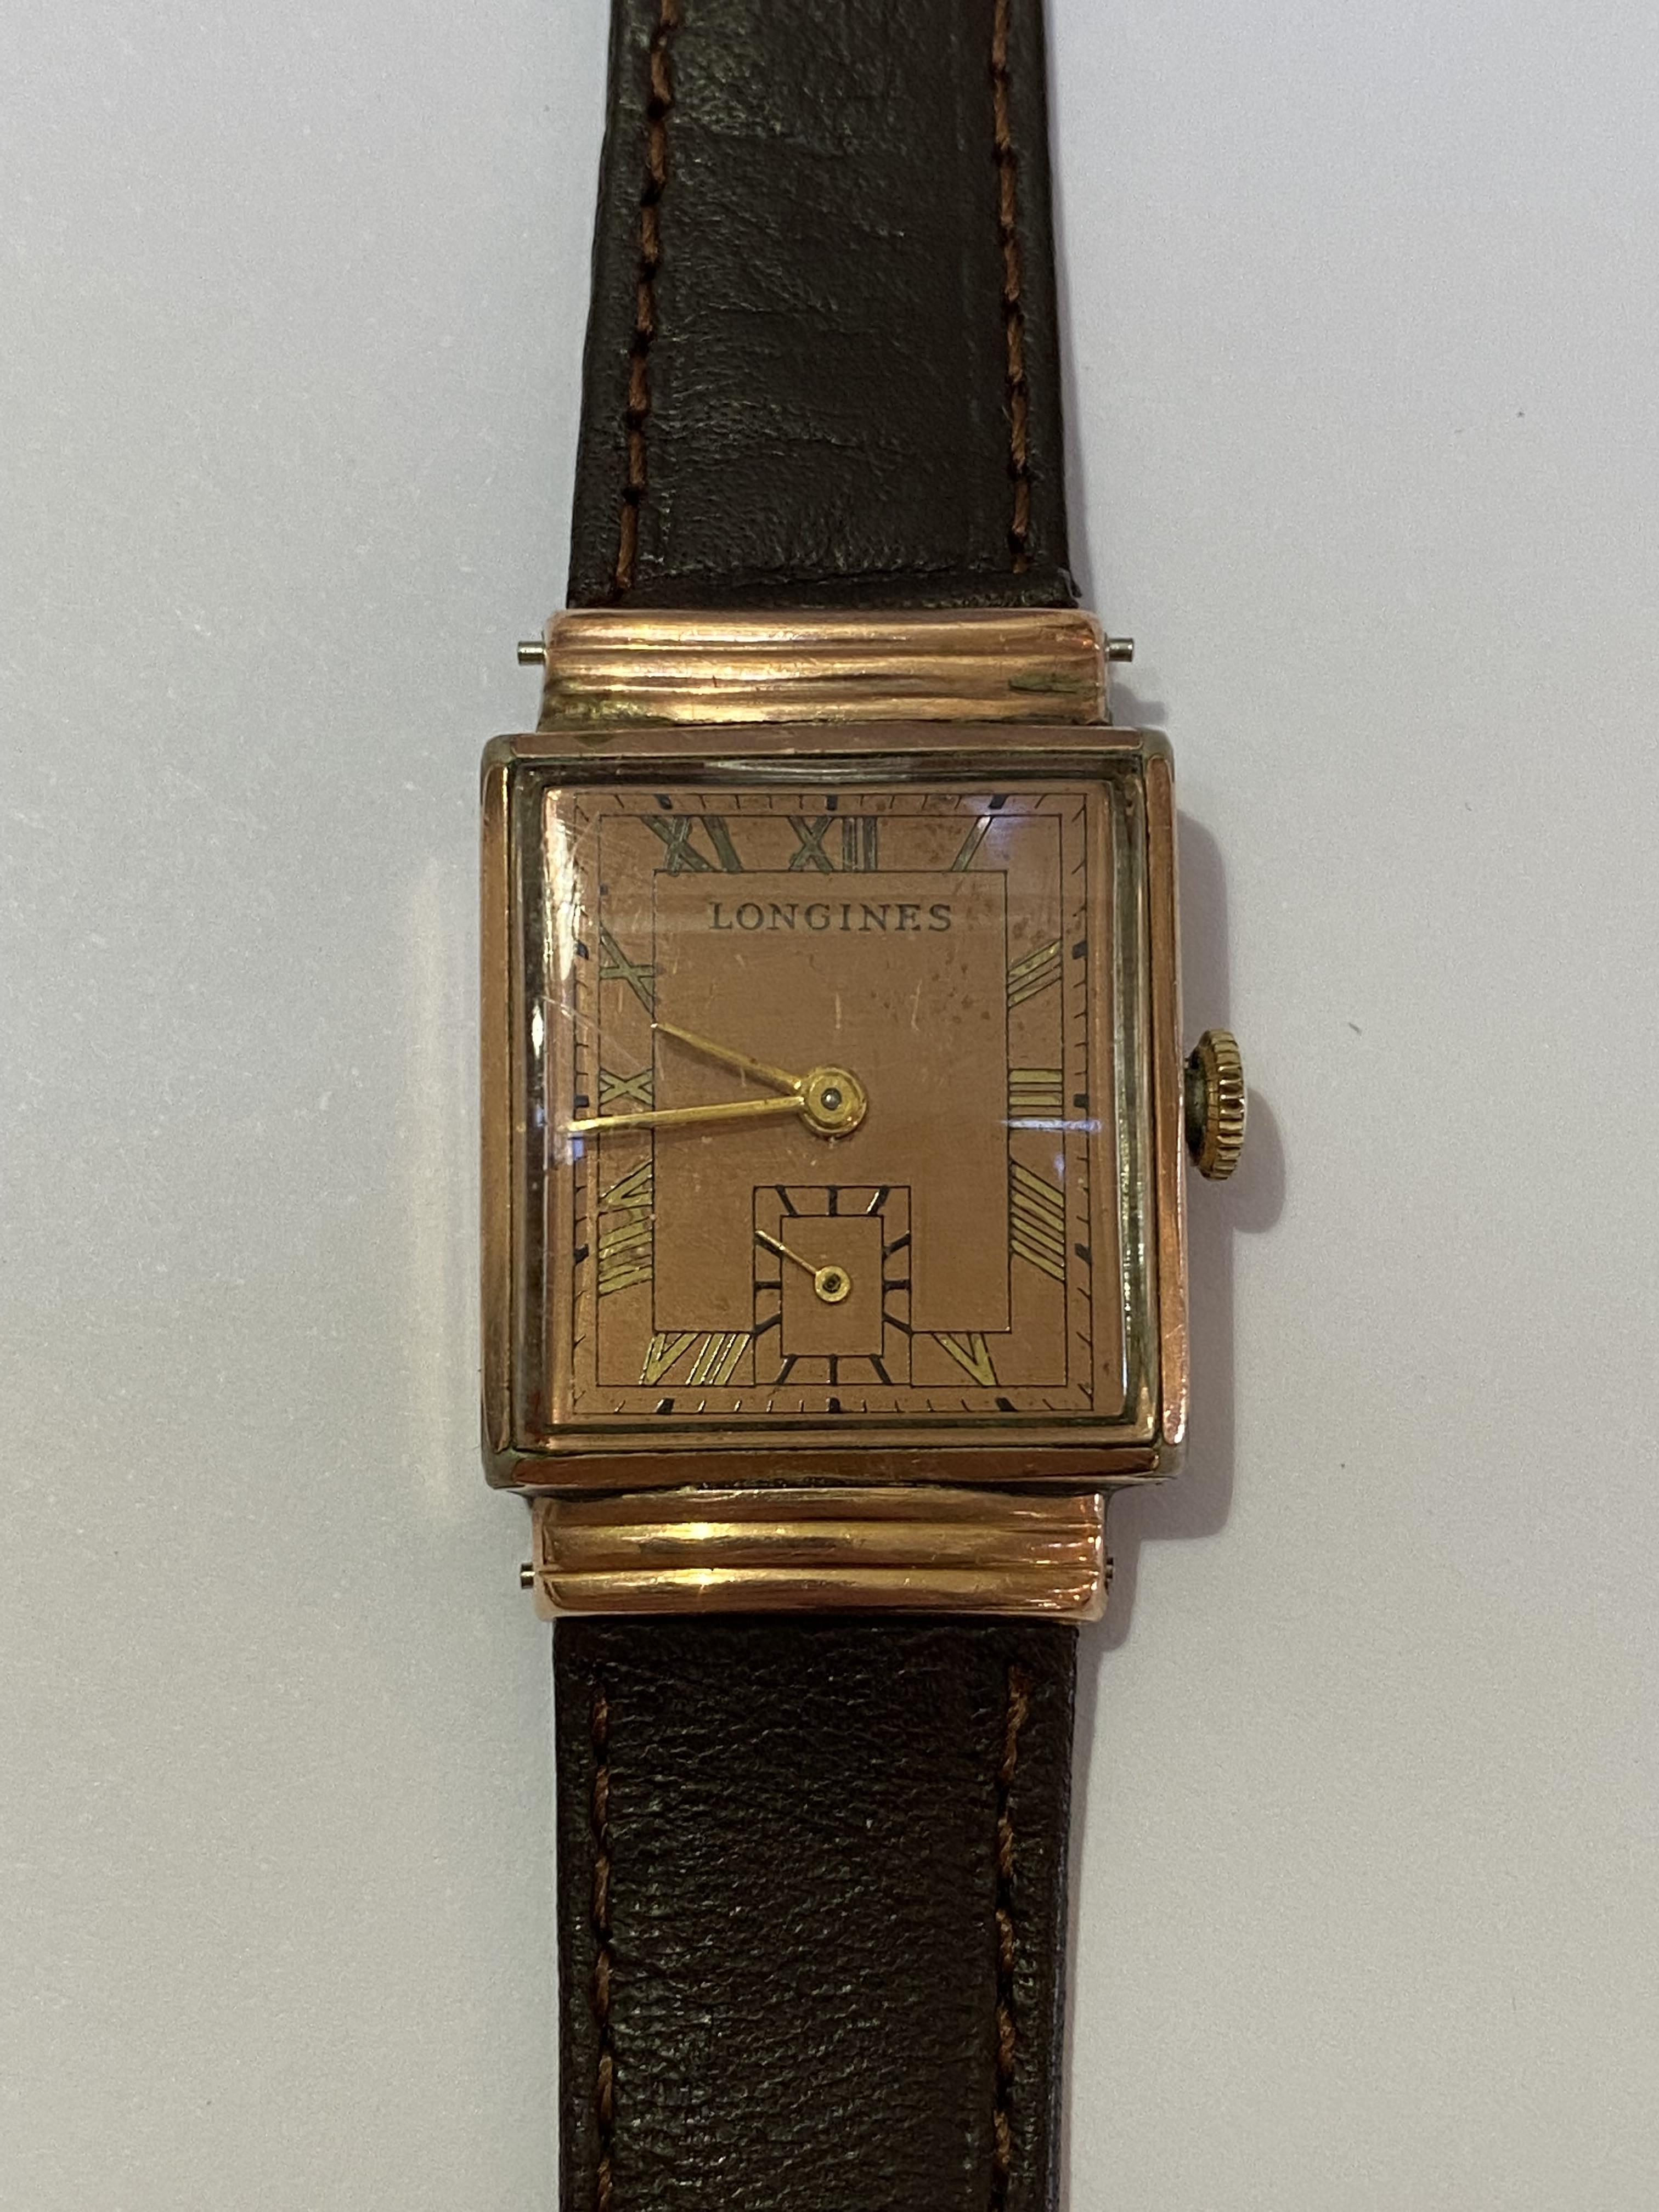 A Longines 10k gold-filled gentleman's wristwatch, c. 1930-40, the rectangular copper finish dial